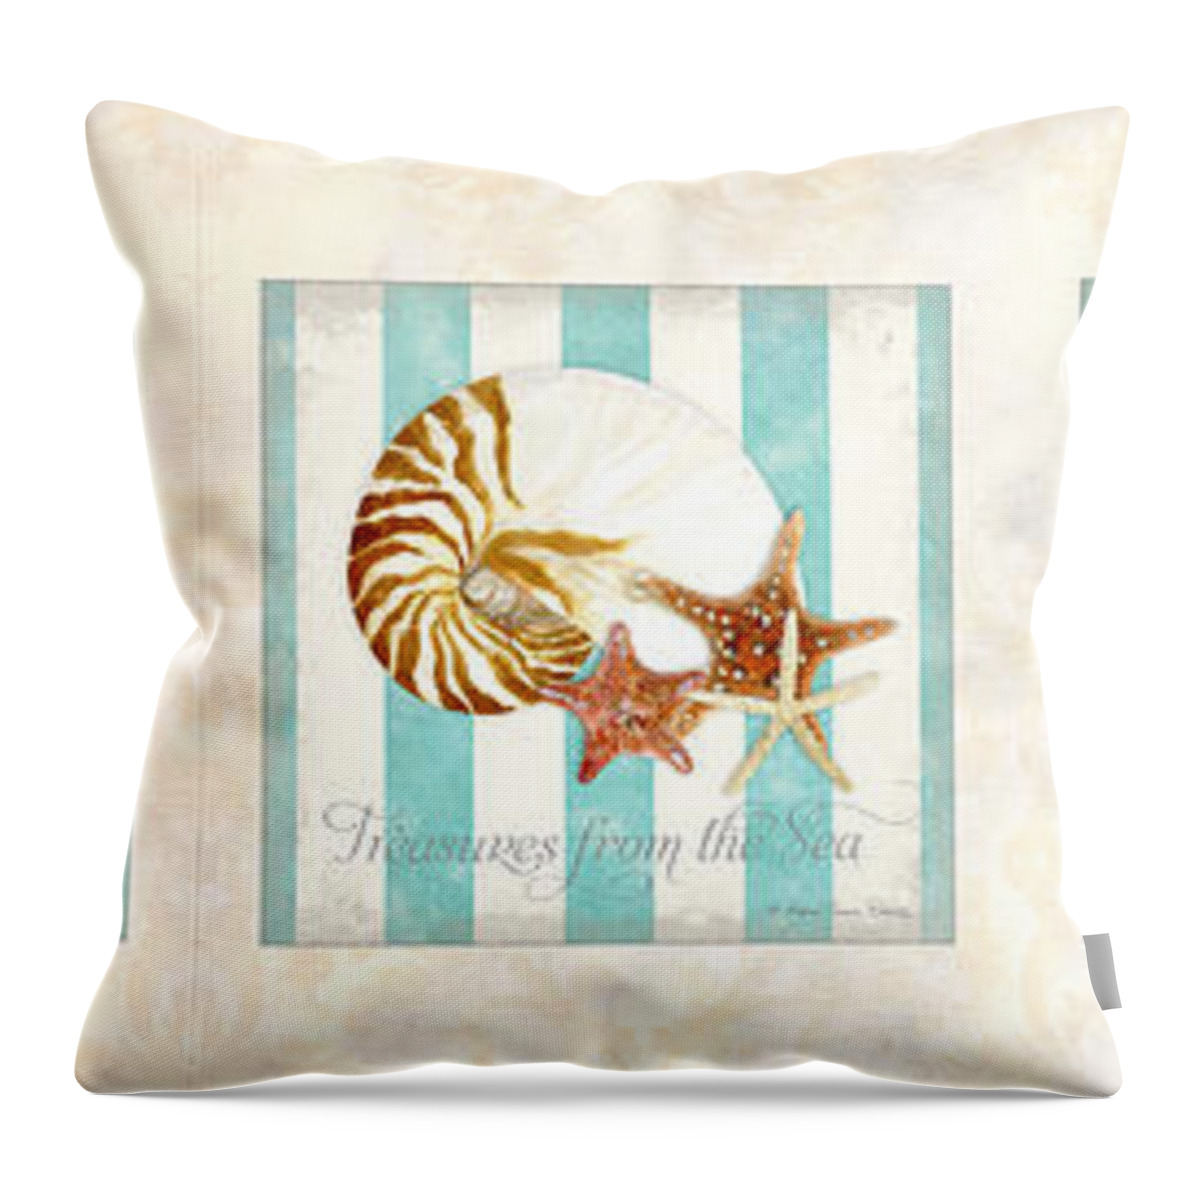 Nautilus Shell Throw Pillow featuring the painting Treasures from the Sea - Nautilus Shell by Audrey Jeanne Roberts